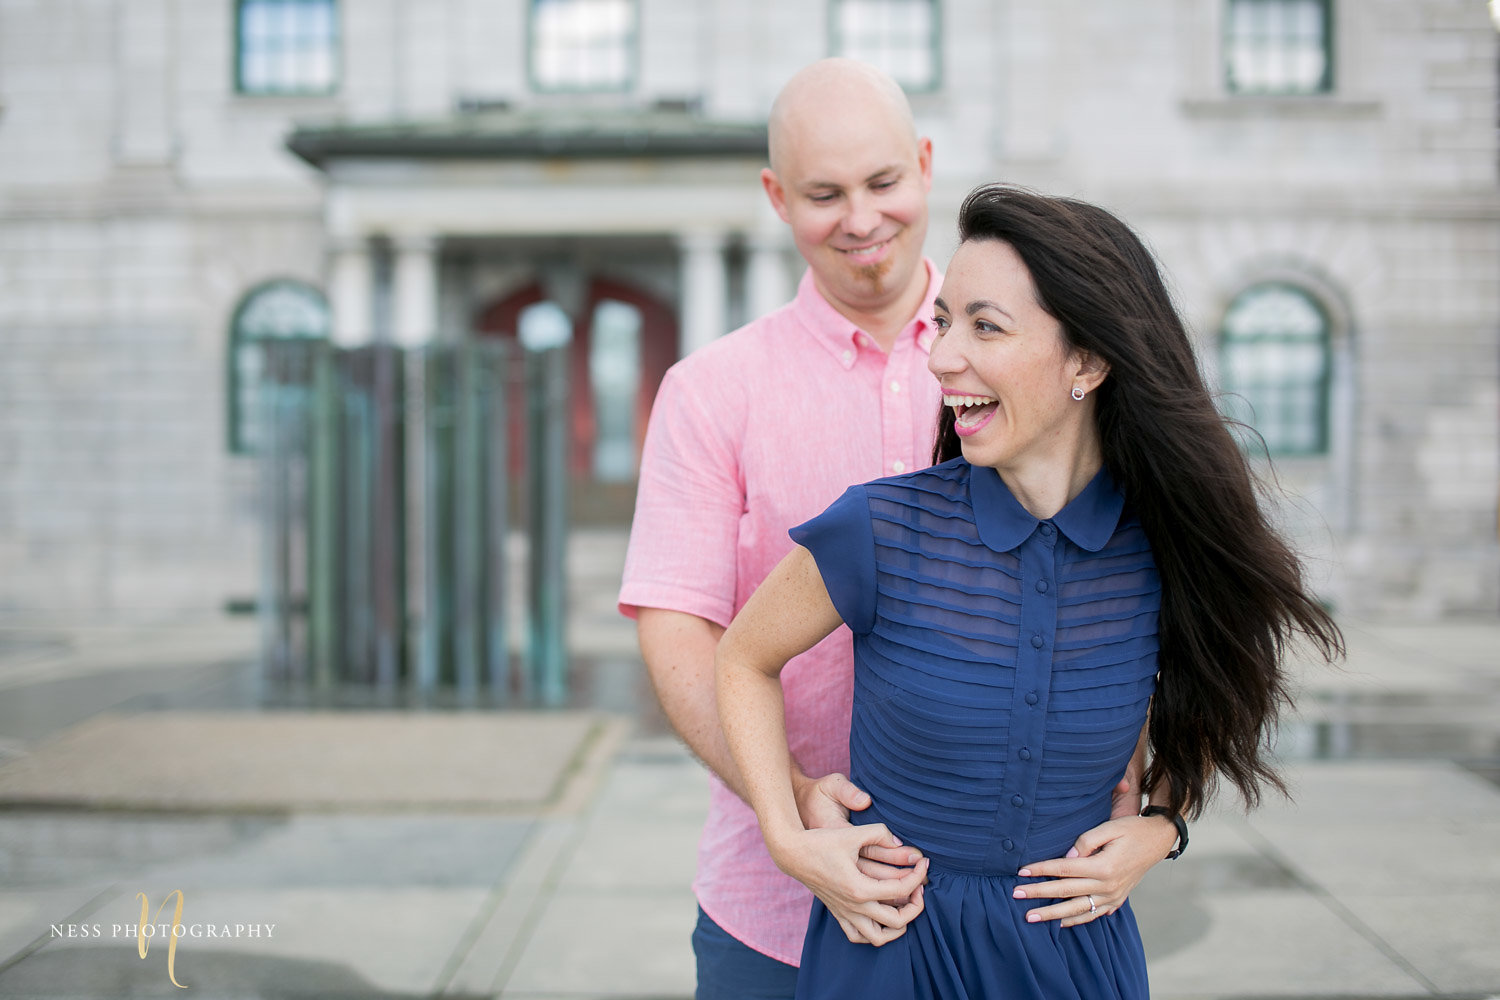 Adelina & Dan Engagement Photos Old Port Montreal with white dog By Ness Photography Wedding and Engagement Photographer 115.jpg